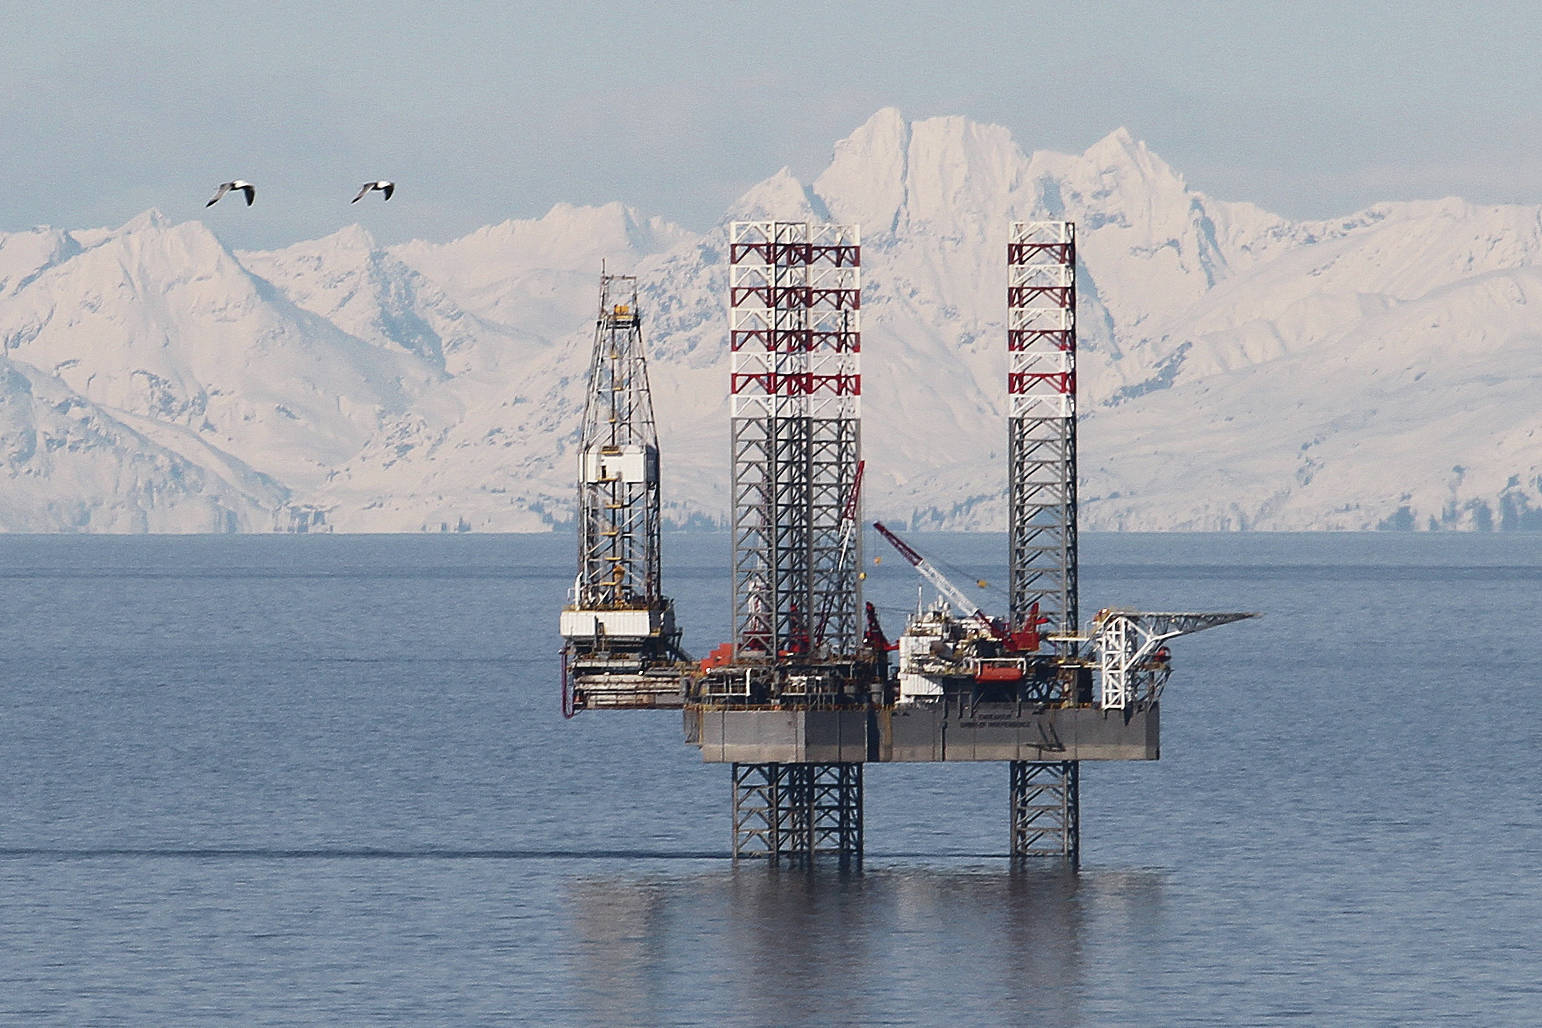 The Endeavour-Spirit of Independence jack up rig, is seen here in early April, 2013, at the Cosmopolitan site in lower Cook Inlet near Anchor Point, Alaska. (Photo by Brian Smith/Peninsula Clarion)